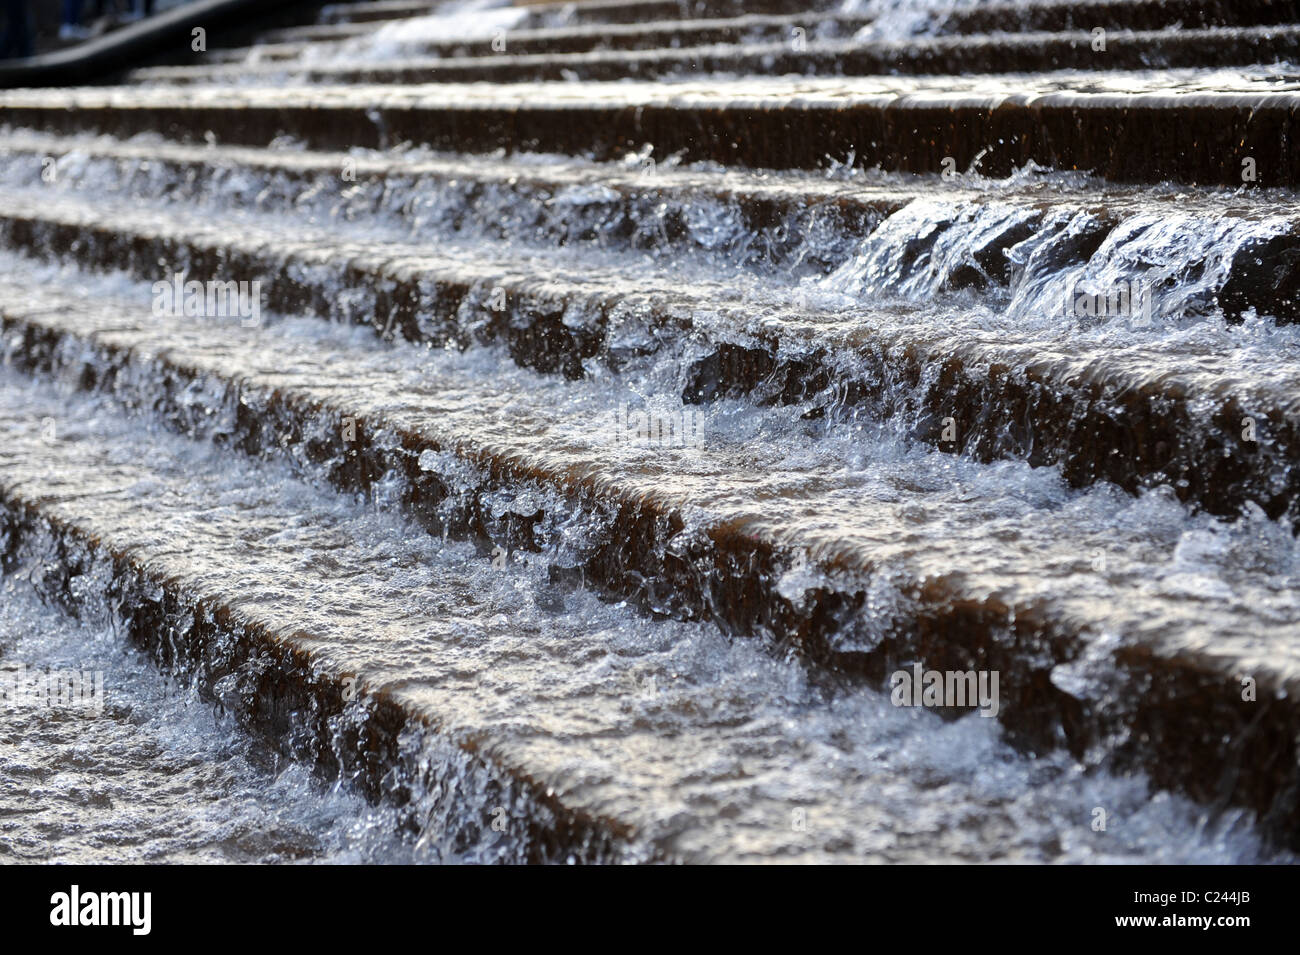 Water pouring down steps during torrential rain in Spain Stock Photo